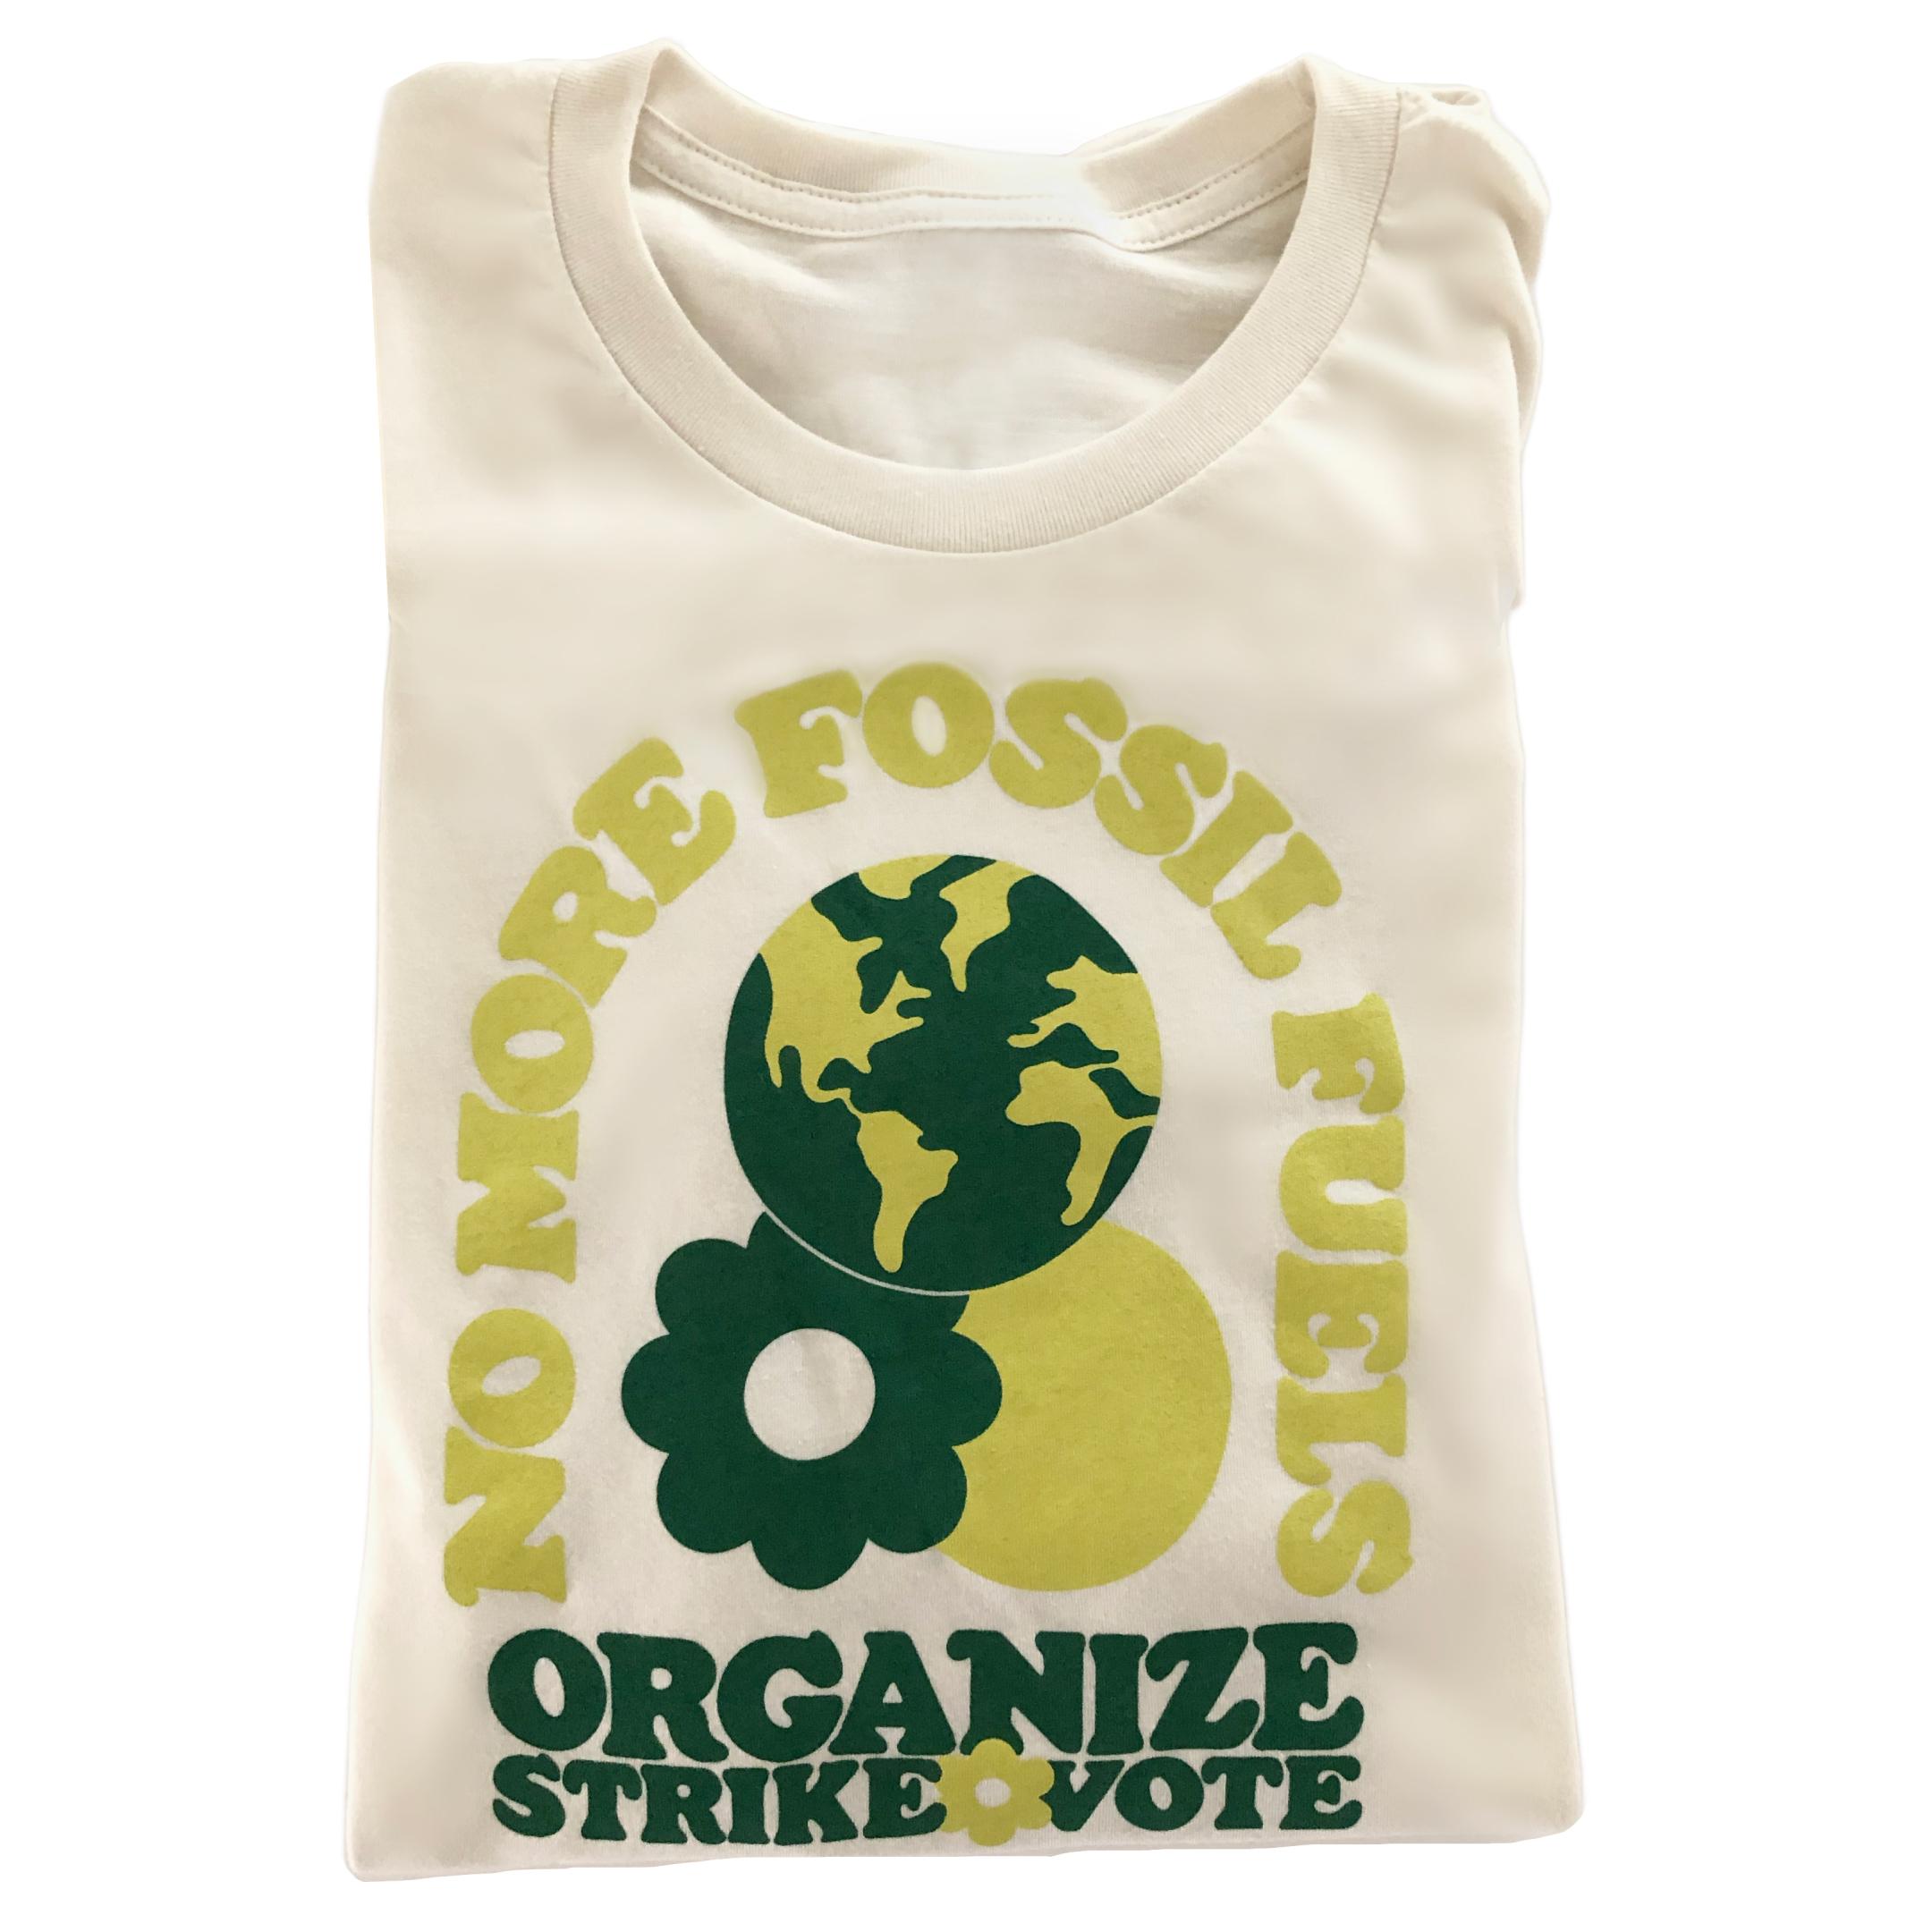 
              Off-white t-shirt with green text folded into a rectangle.
              The design says “No more fossil fuels” in an arch
              and then underneath it reads “Organize, Strike, Vote.”
              There is an illustration of the earth, sun and a daisy also.
            